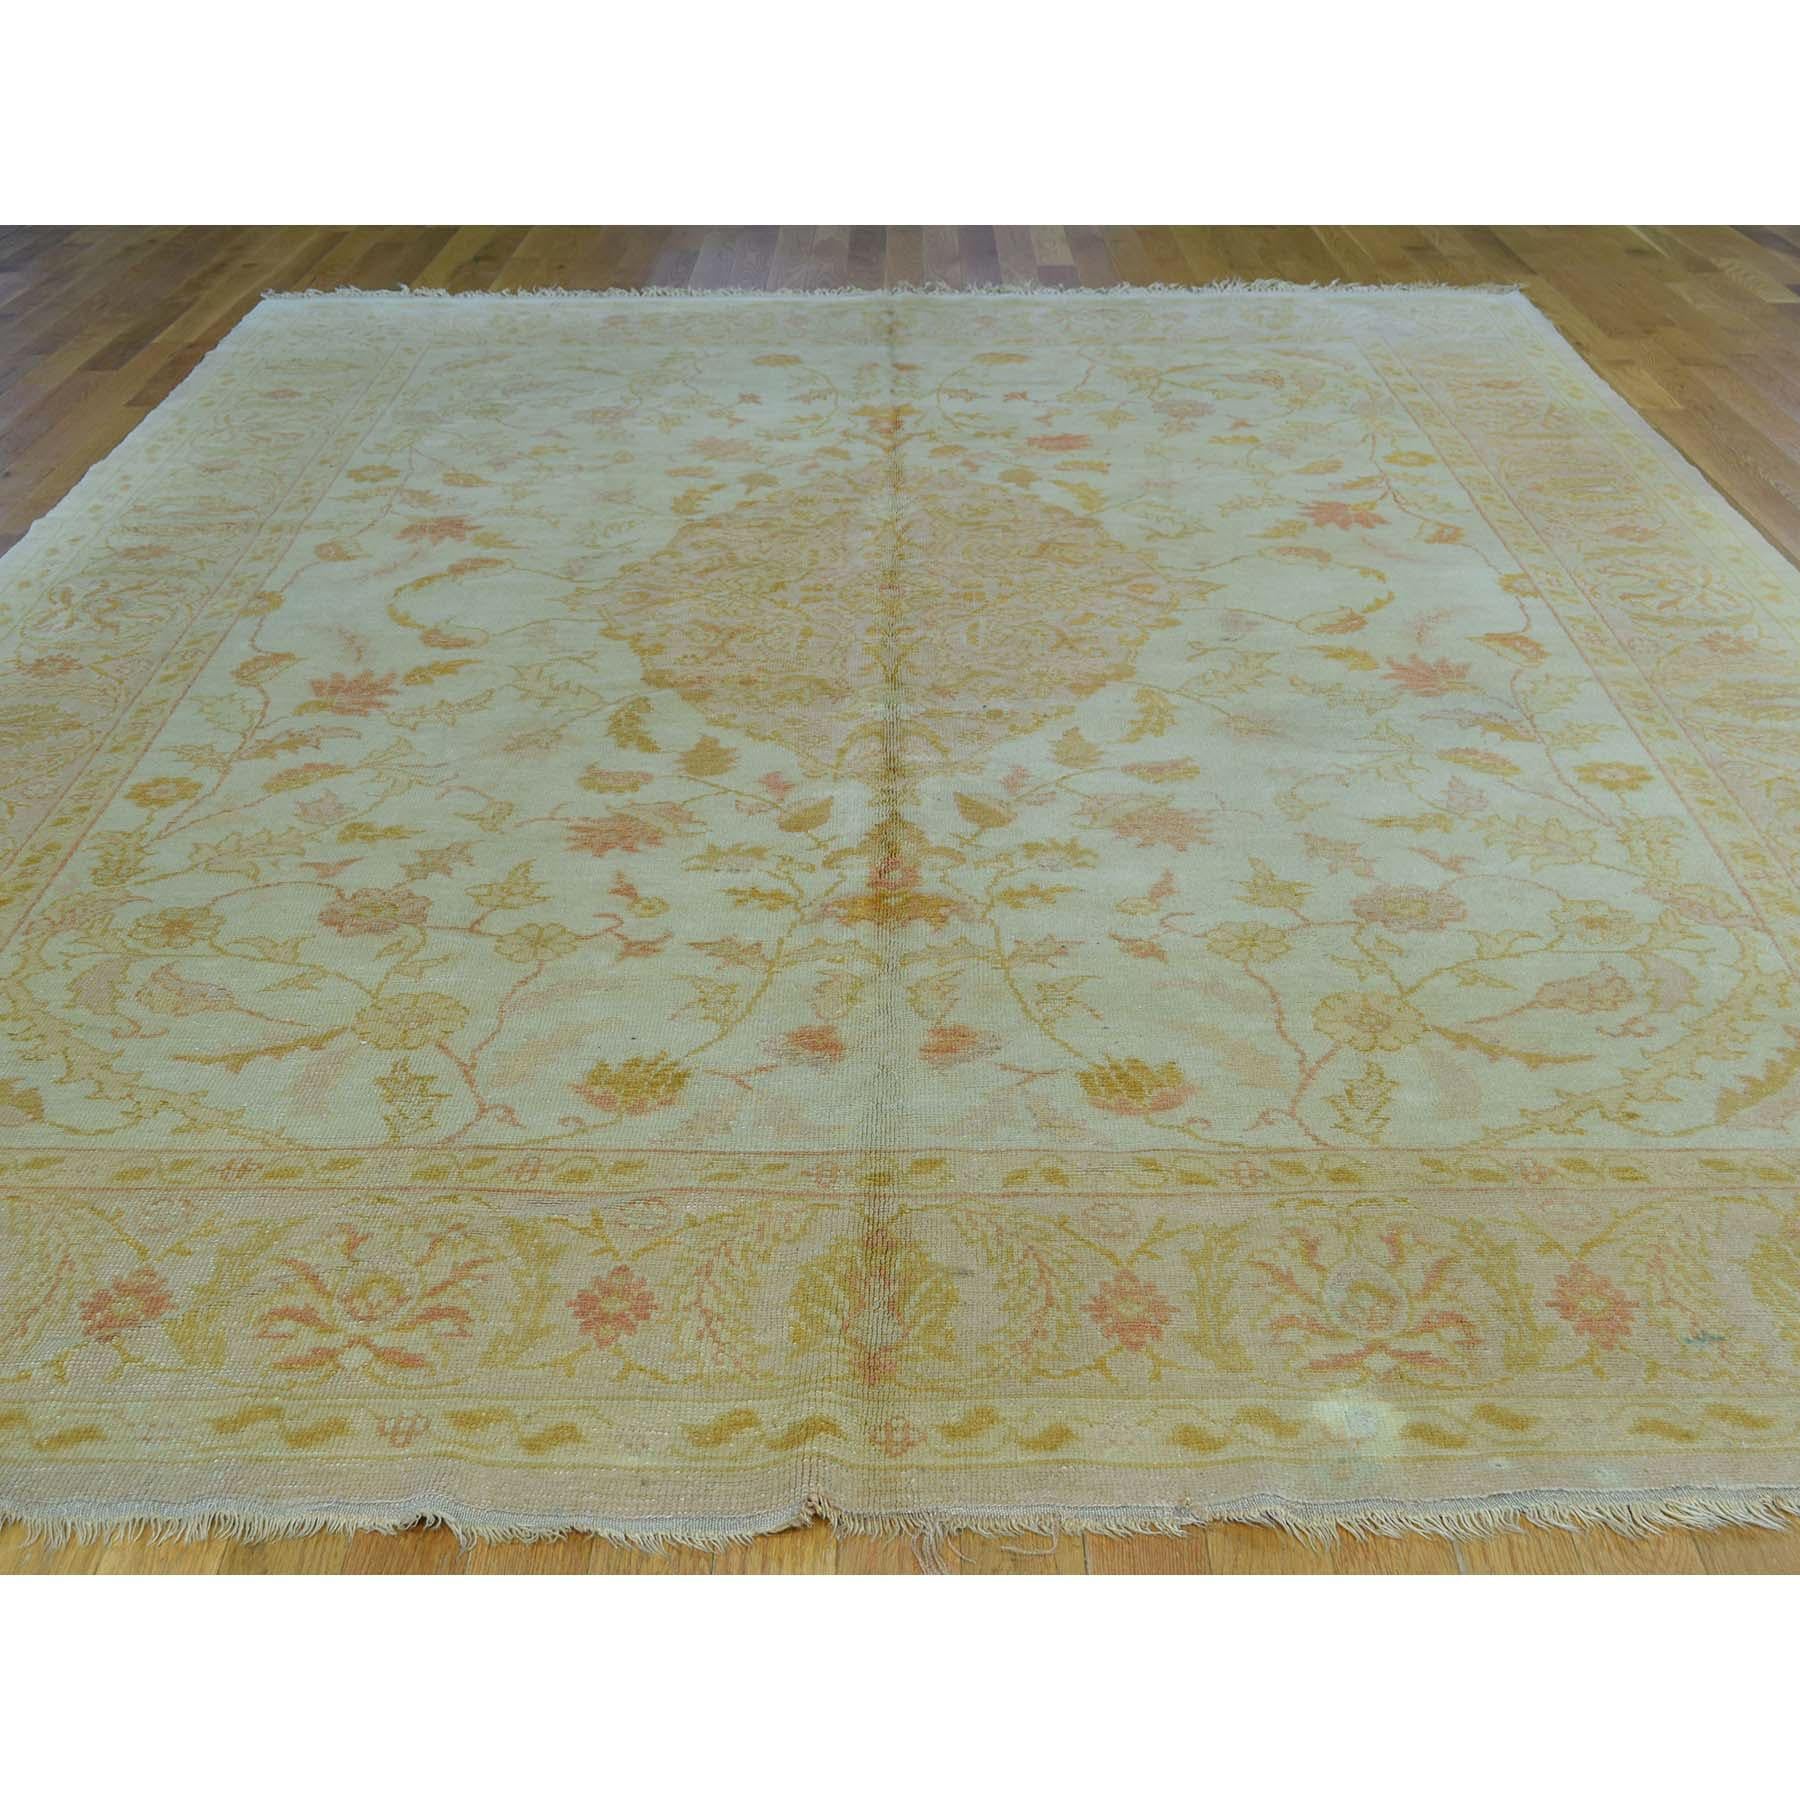 This is a truly genuine one-of-a-kind hand knotted antique Turkish Oushak soft colors oriental rug. It has been Knotted for months and months in the centuries-old Persian weaving craftsmanship techniques by expert artisans. Measures: 8'7